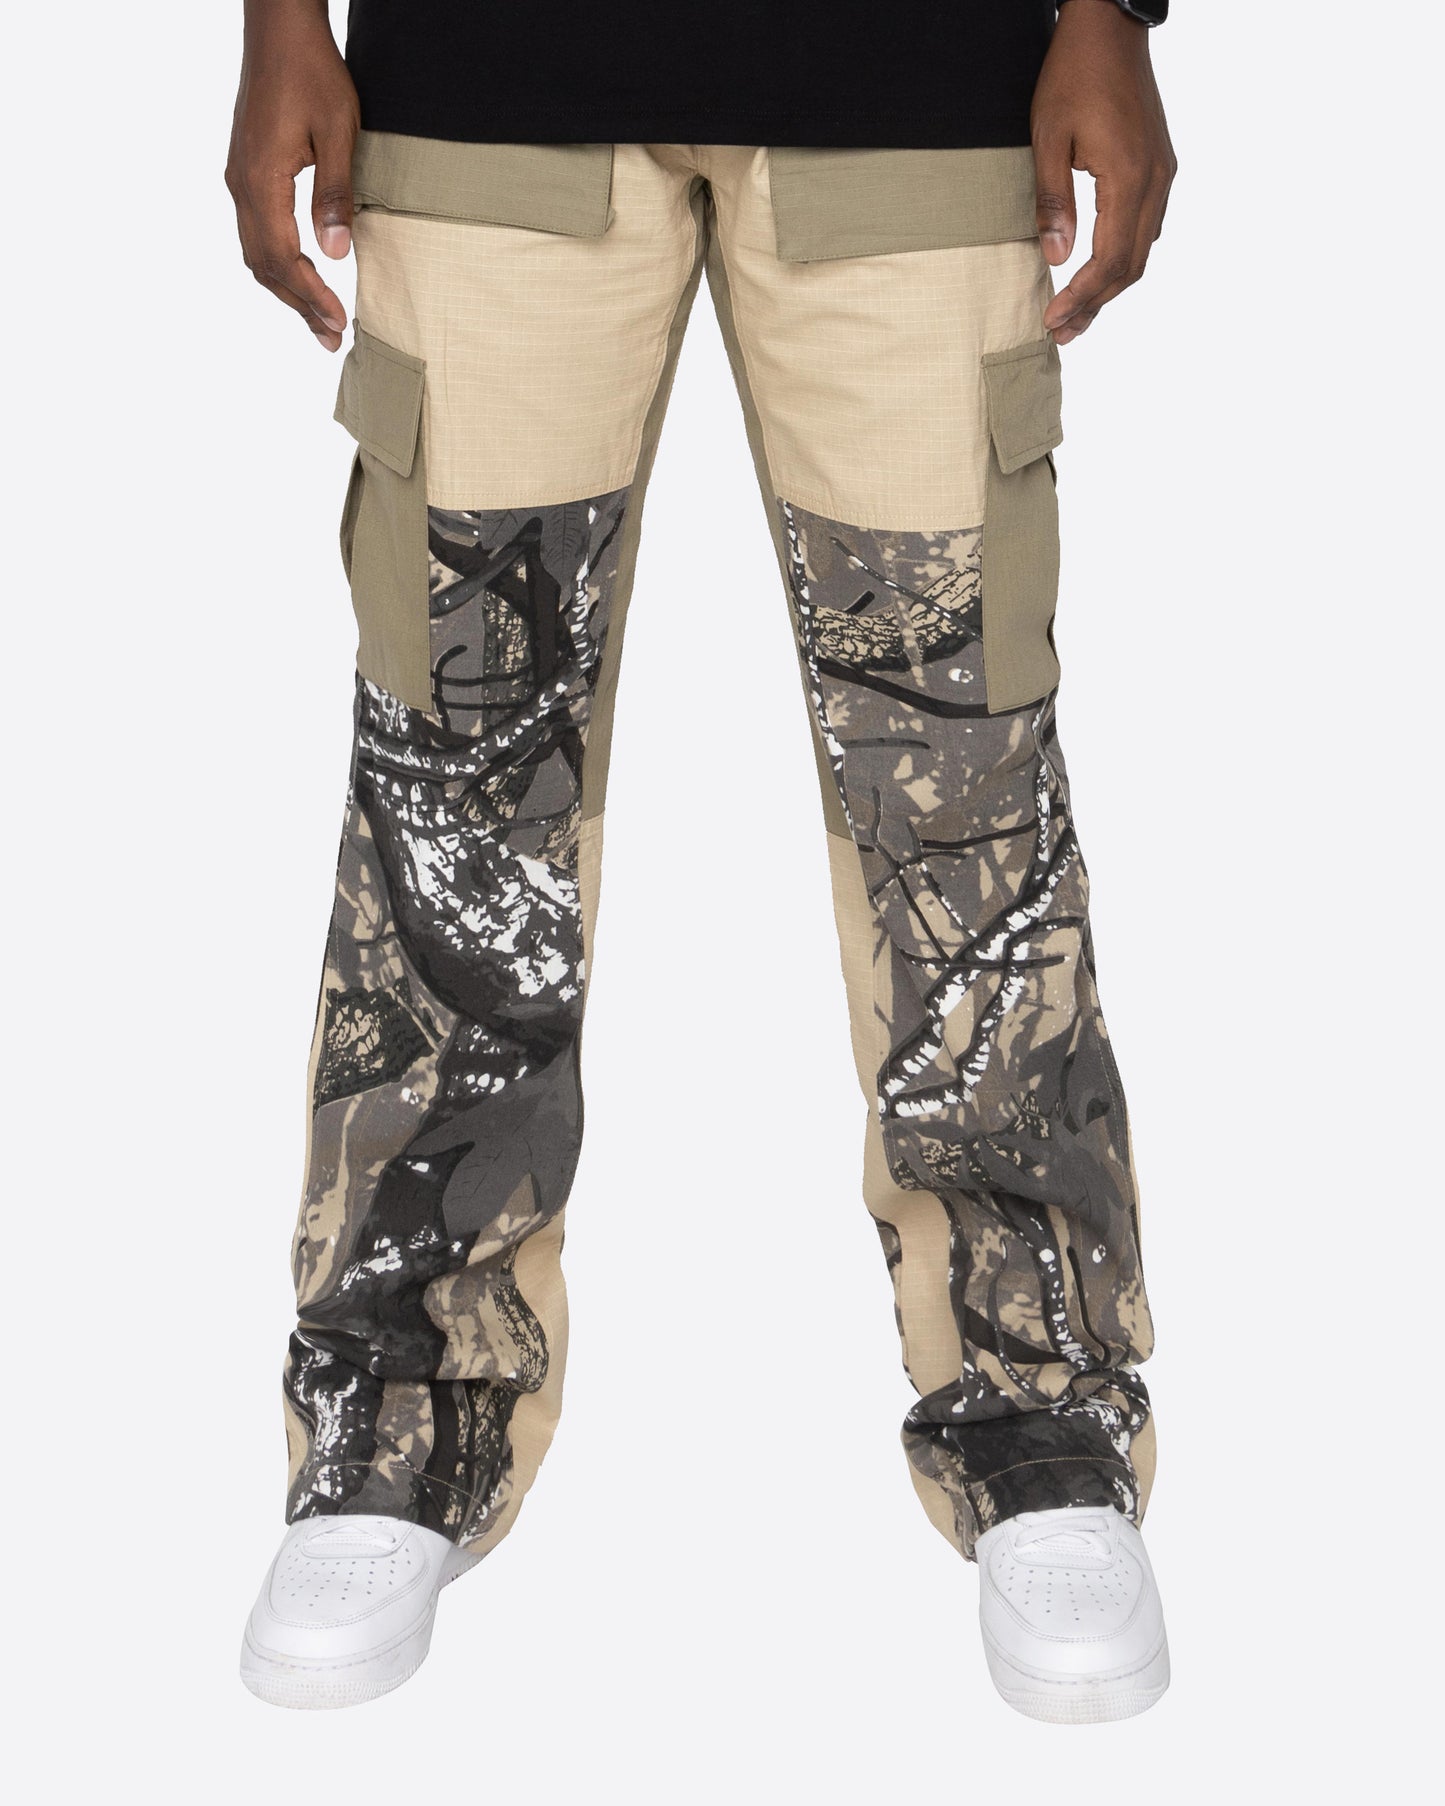 DAVE EAST FTD CARGOS-OLIVE CAMO